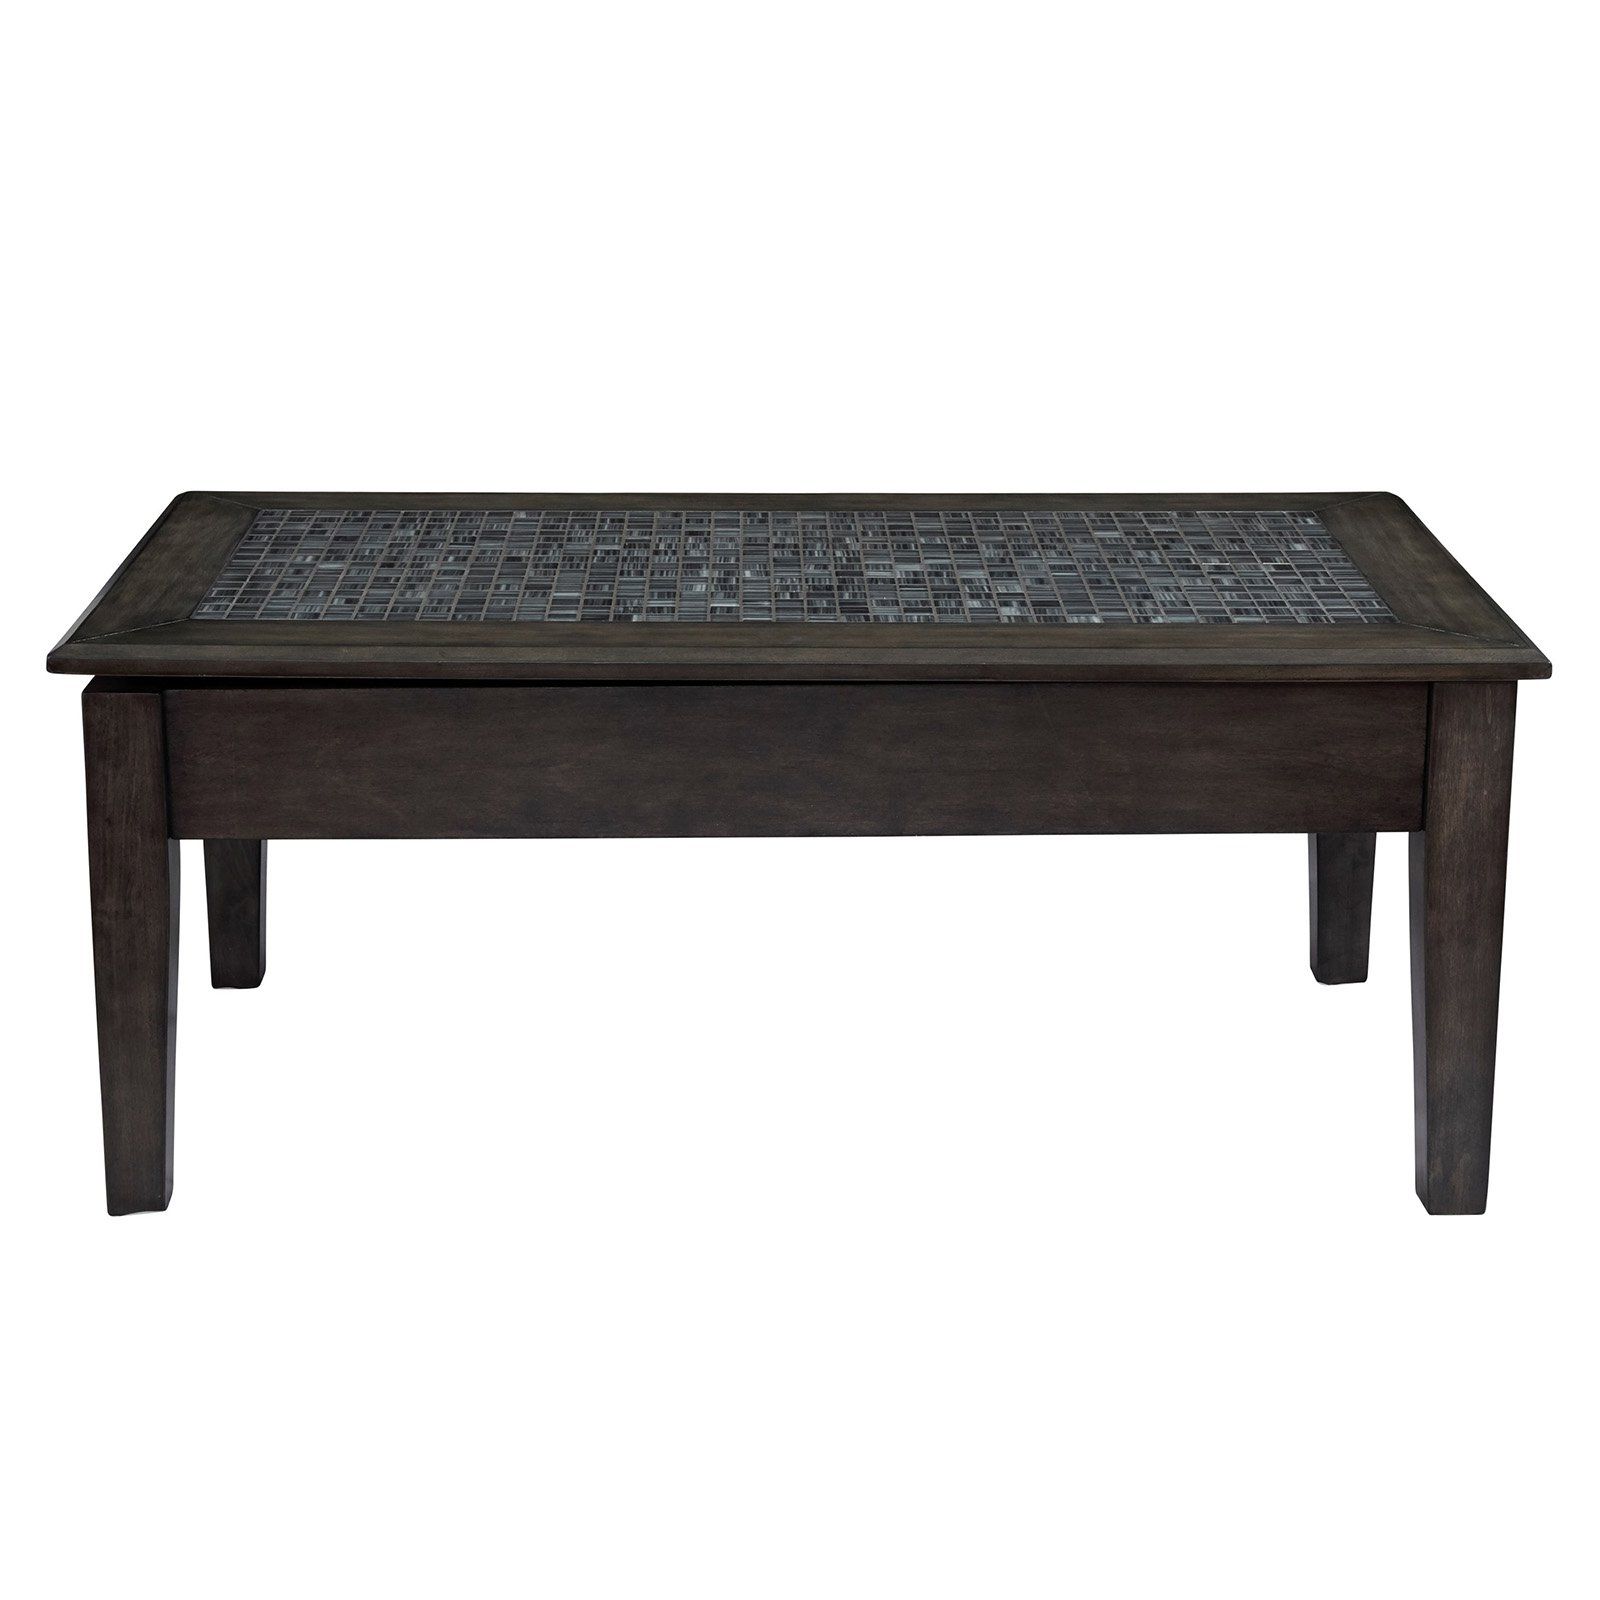 Well Liked Gray Wood Veneer Cocktail Tables Regarding Grey Mosaic Lift Top Cocktail Table Quantity:1 – Walmart (View 10 of 20)